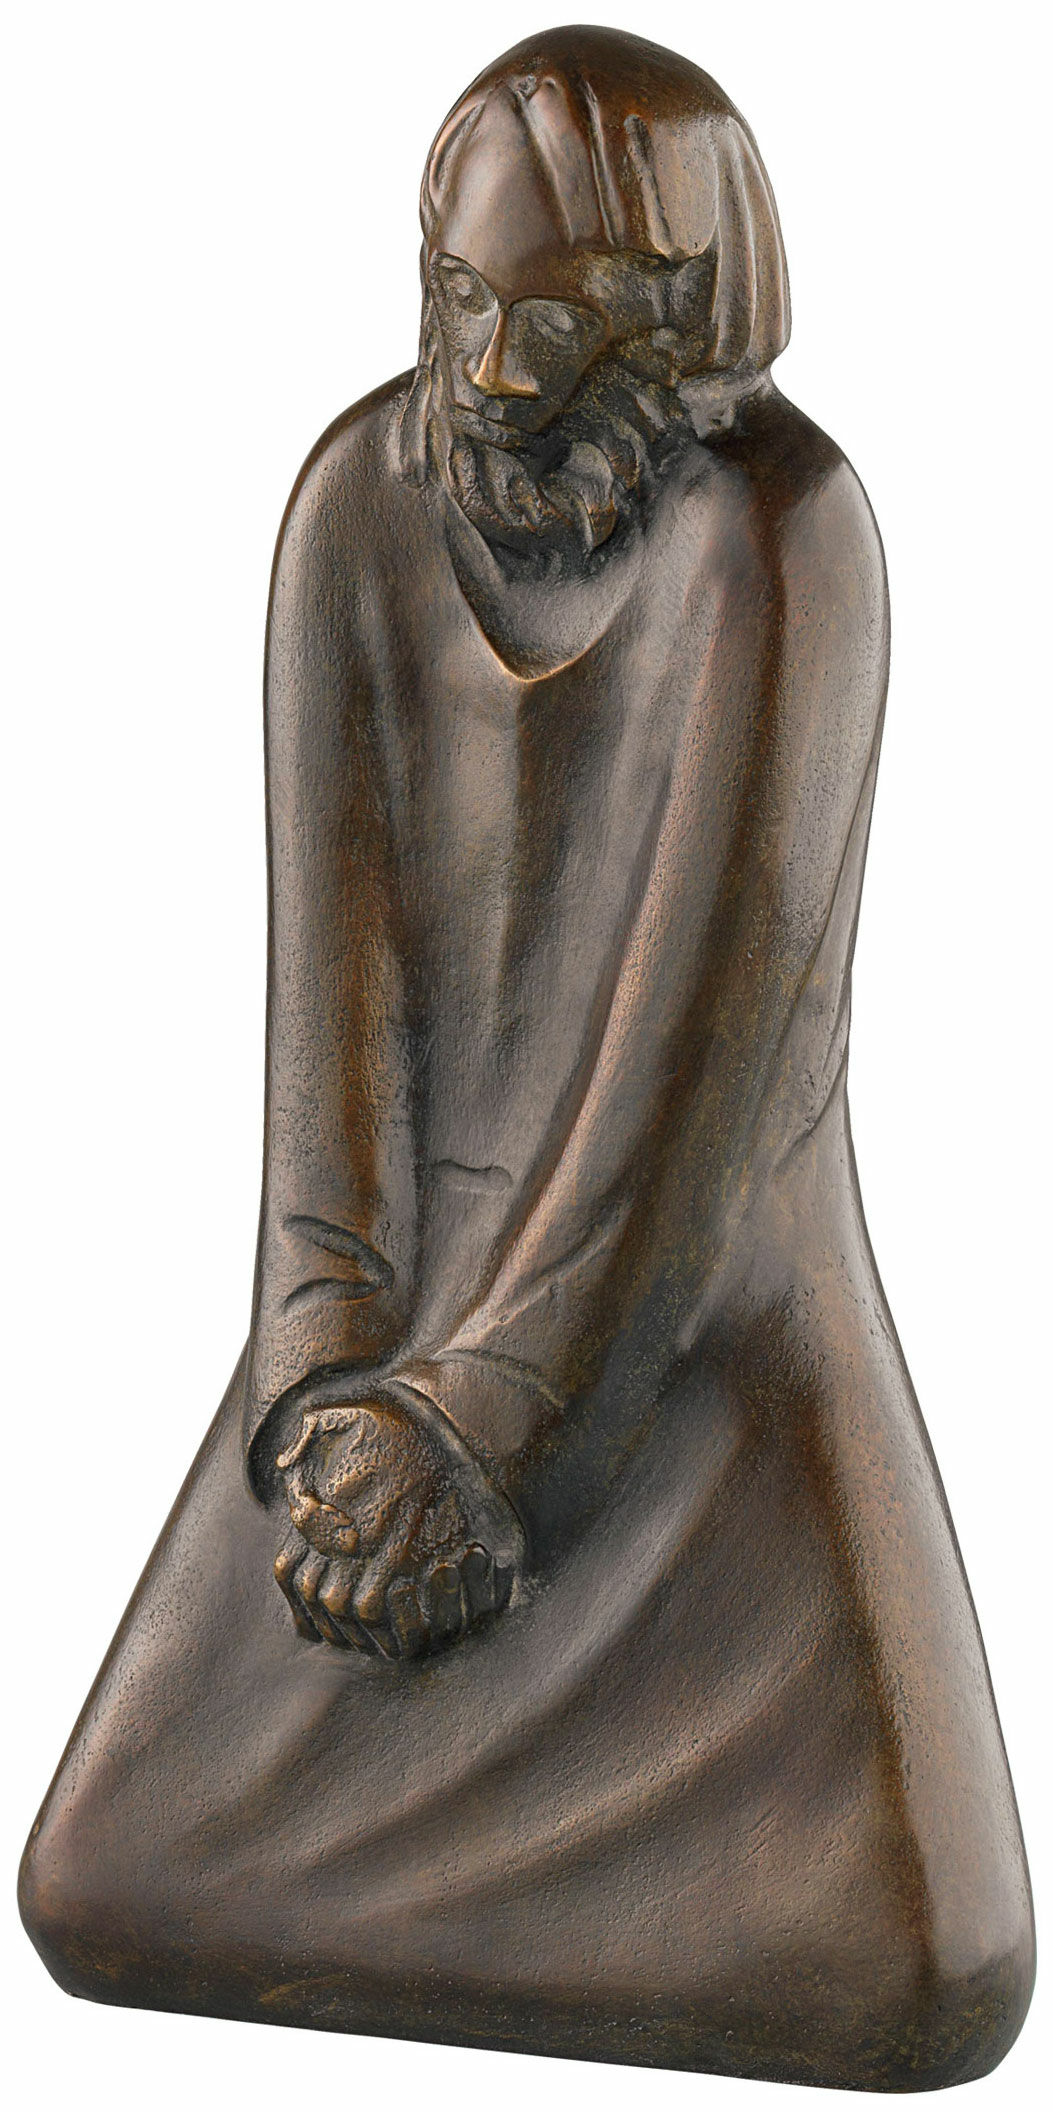 Sculpture "The Doubter" (1931), bronze reduction by Ernst Barlach